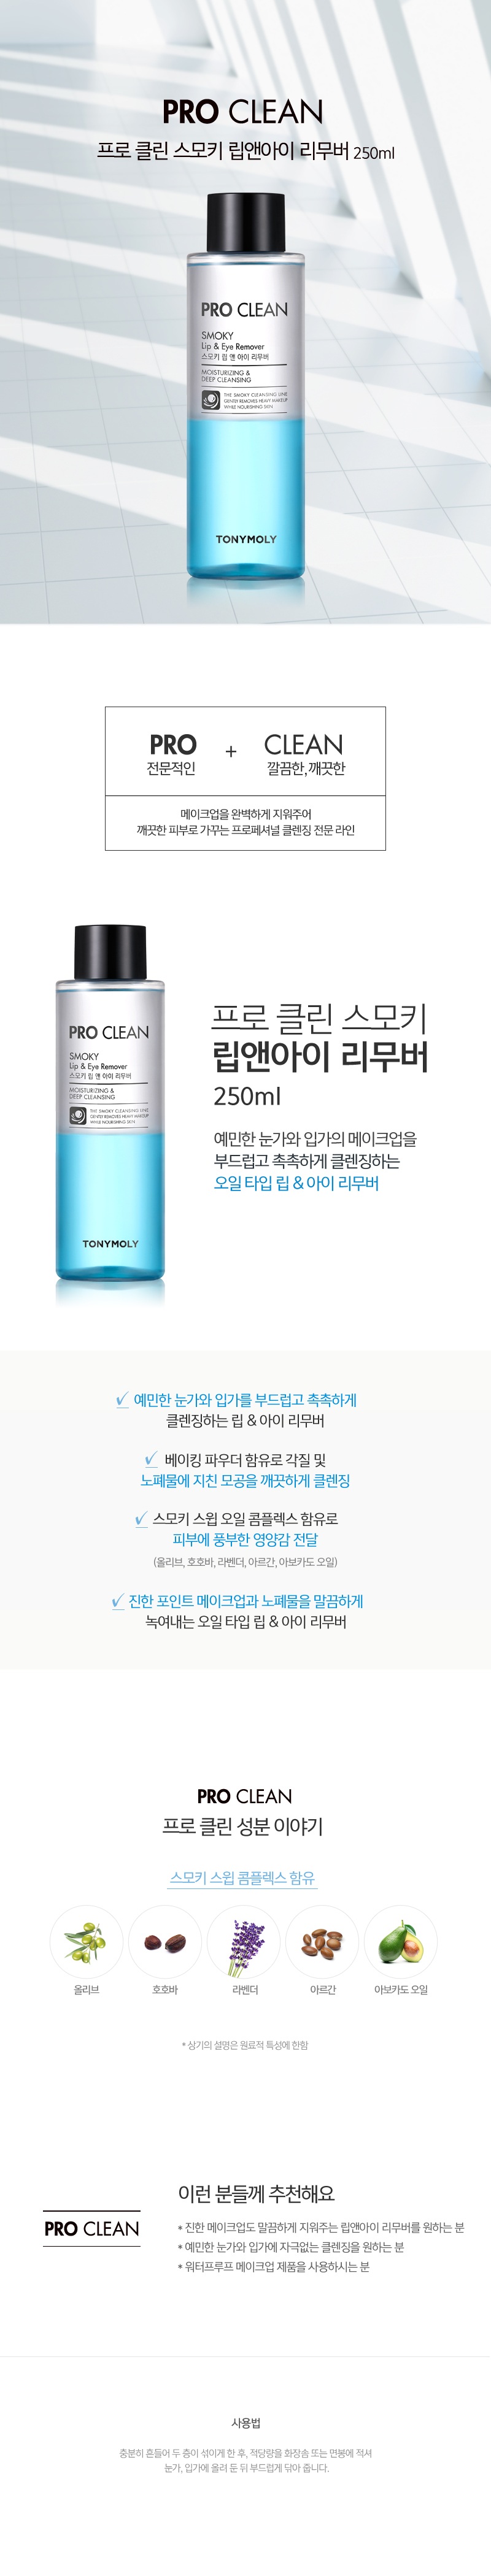 Tony Moly Pro Clean Smoky Lip and Eye Remover 2 korean cleanser product online shop malaysia china thailand1